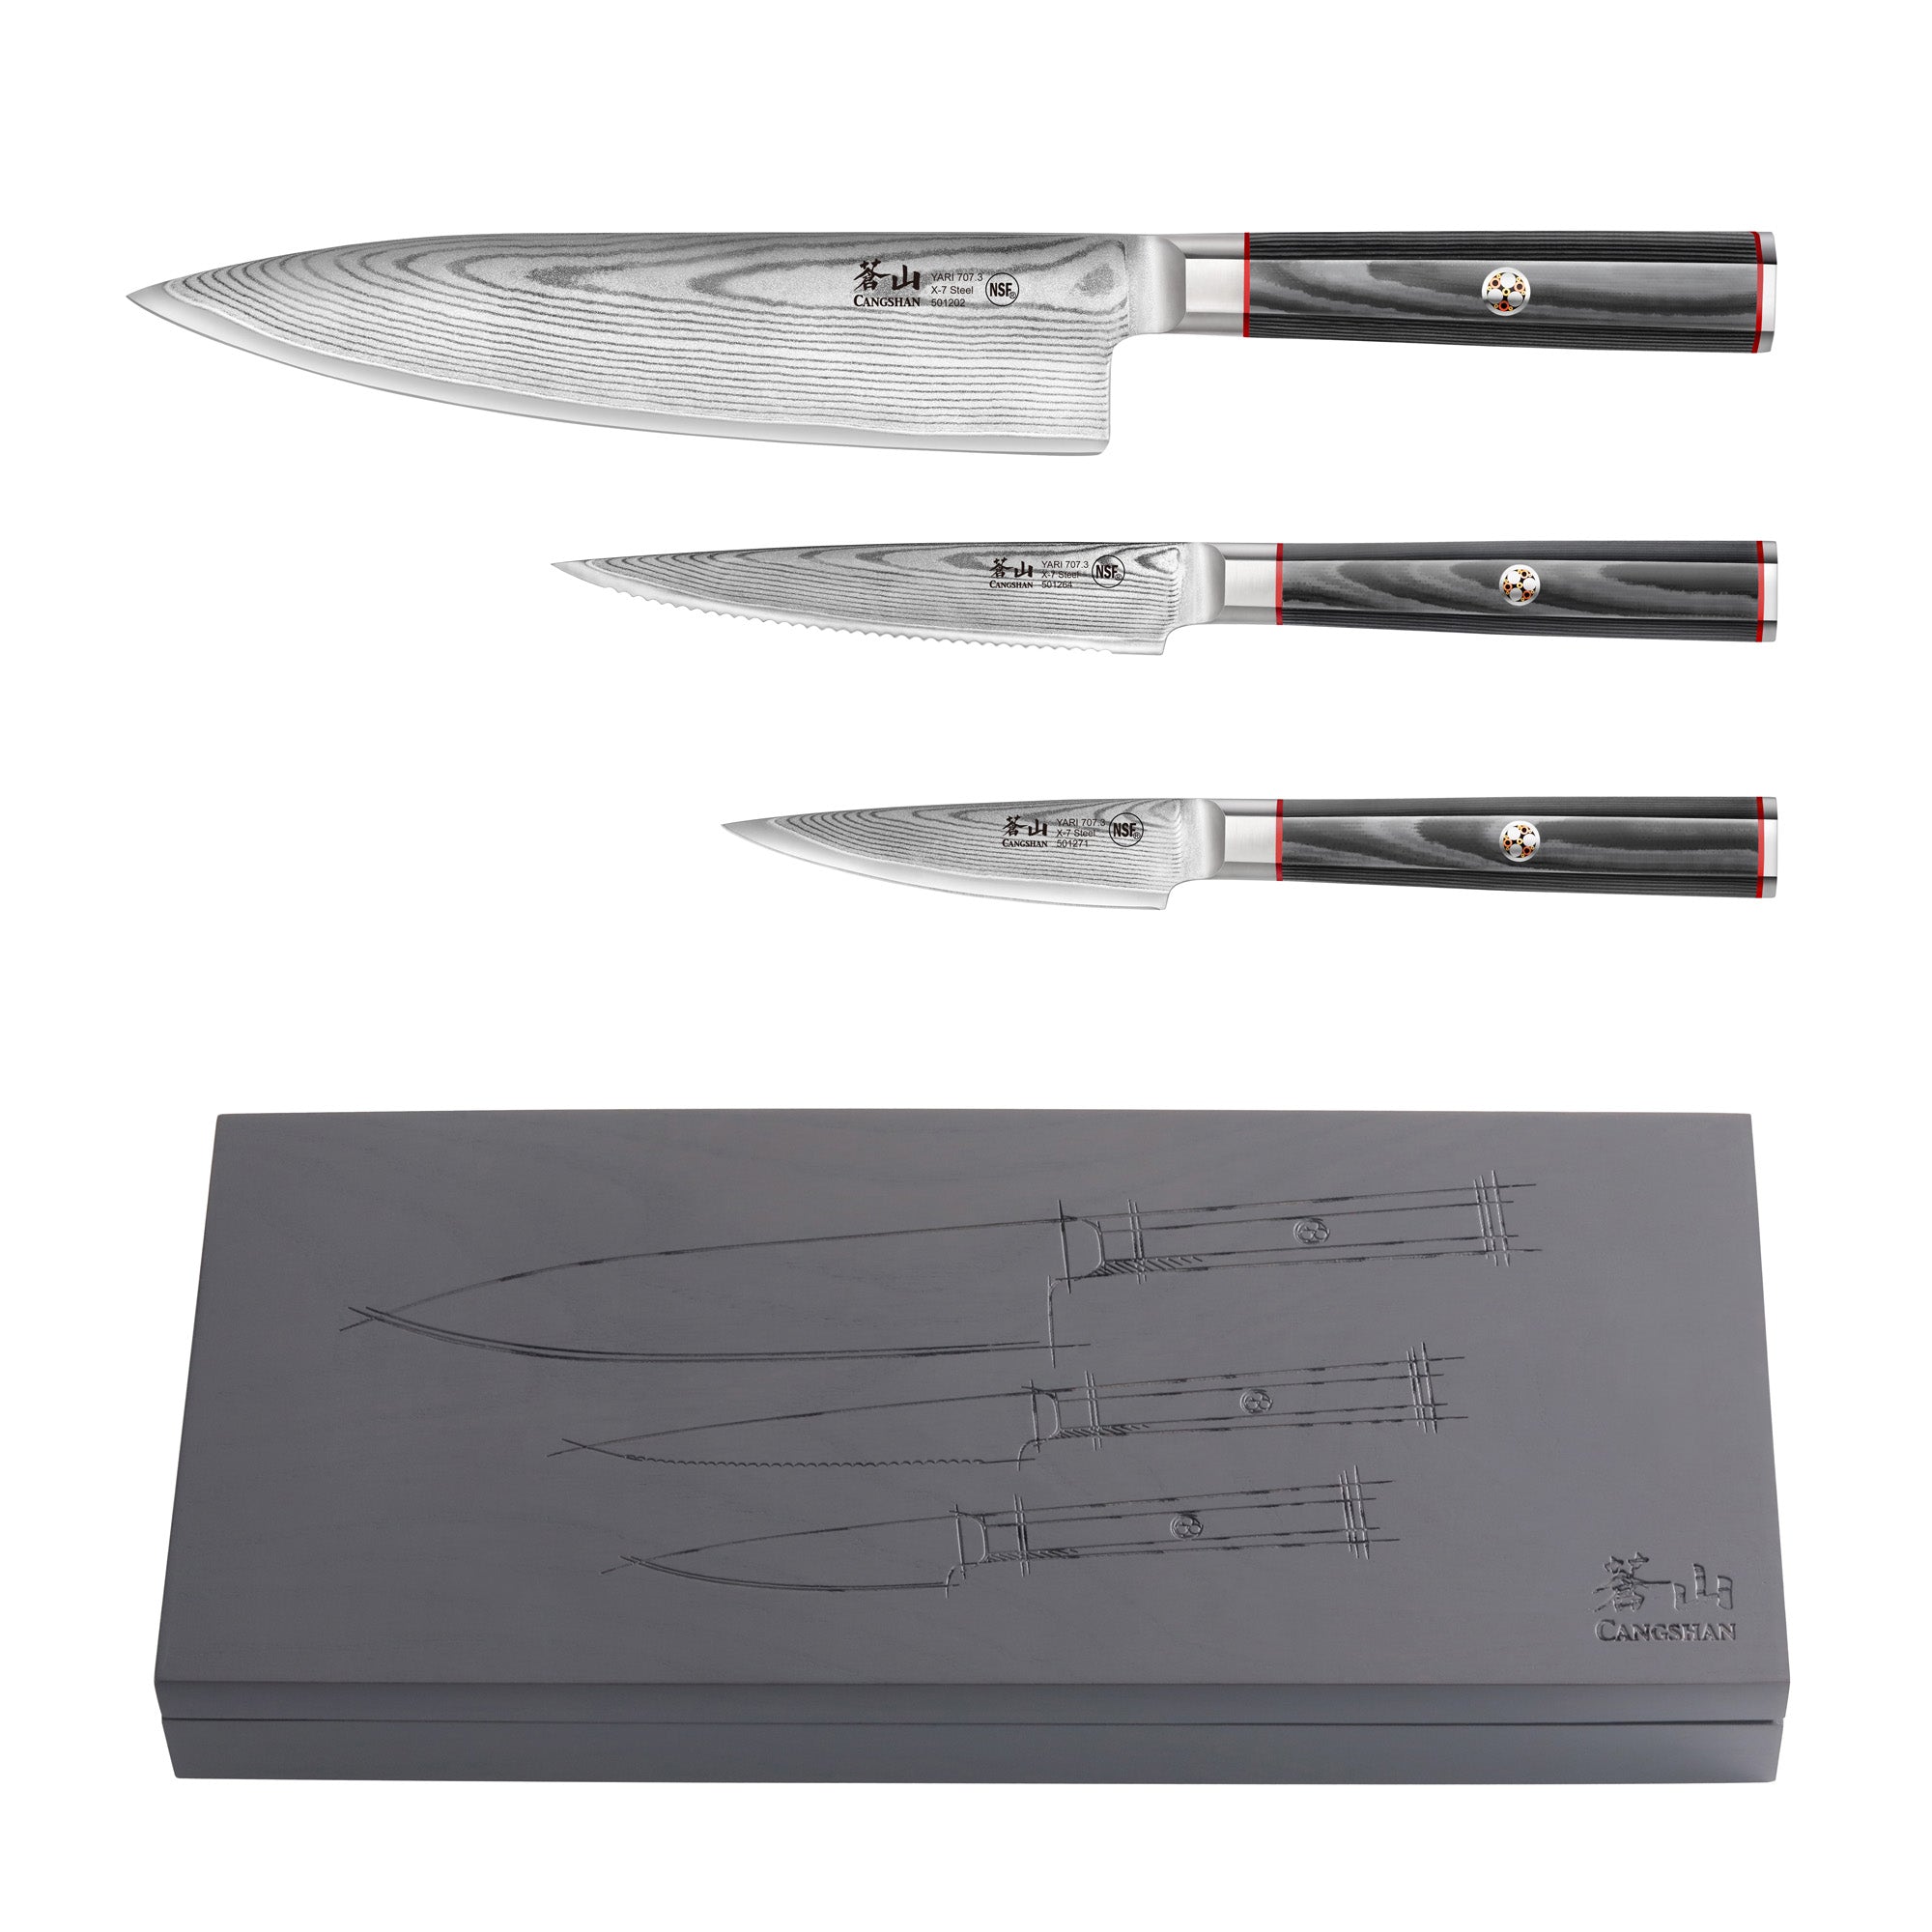 Professional Chef Knife Sets  Meat Cutting Knives - Fusion Layers